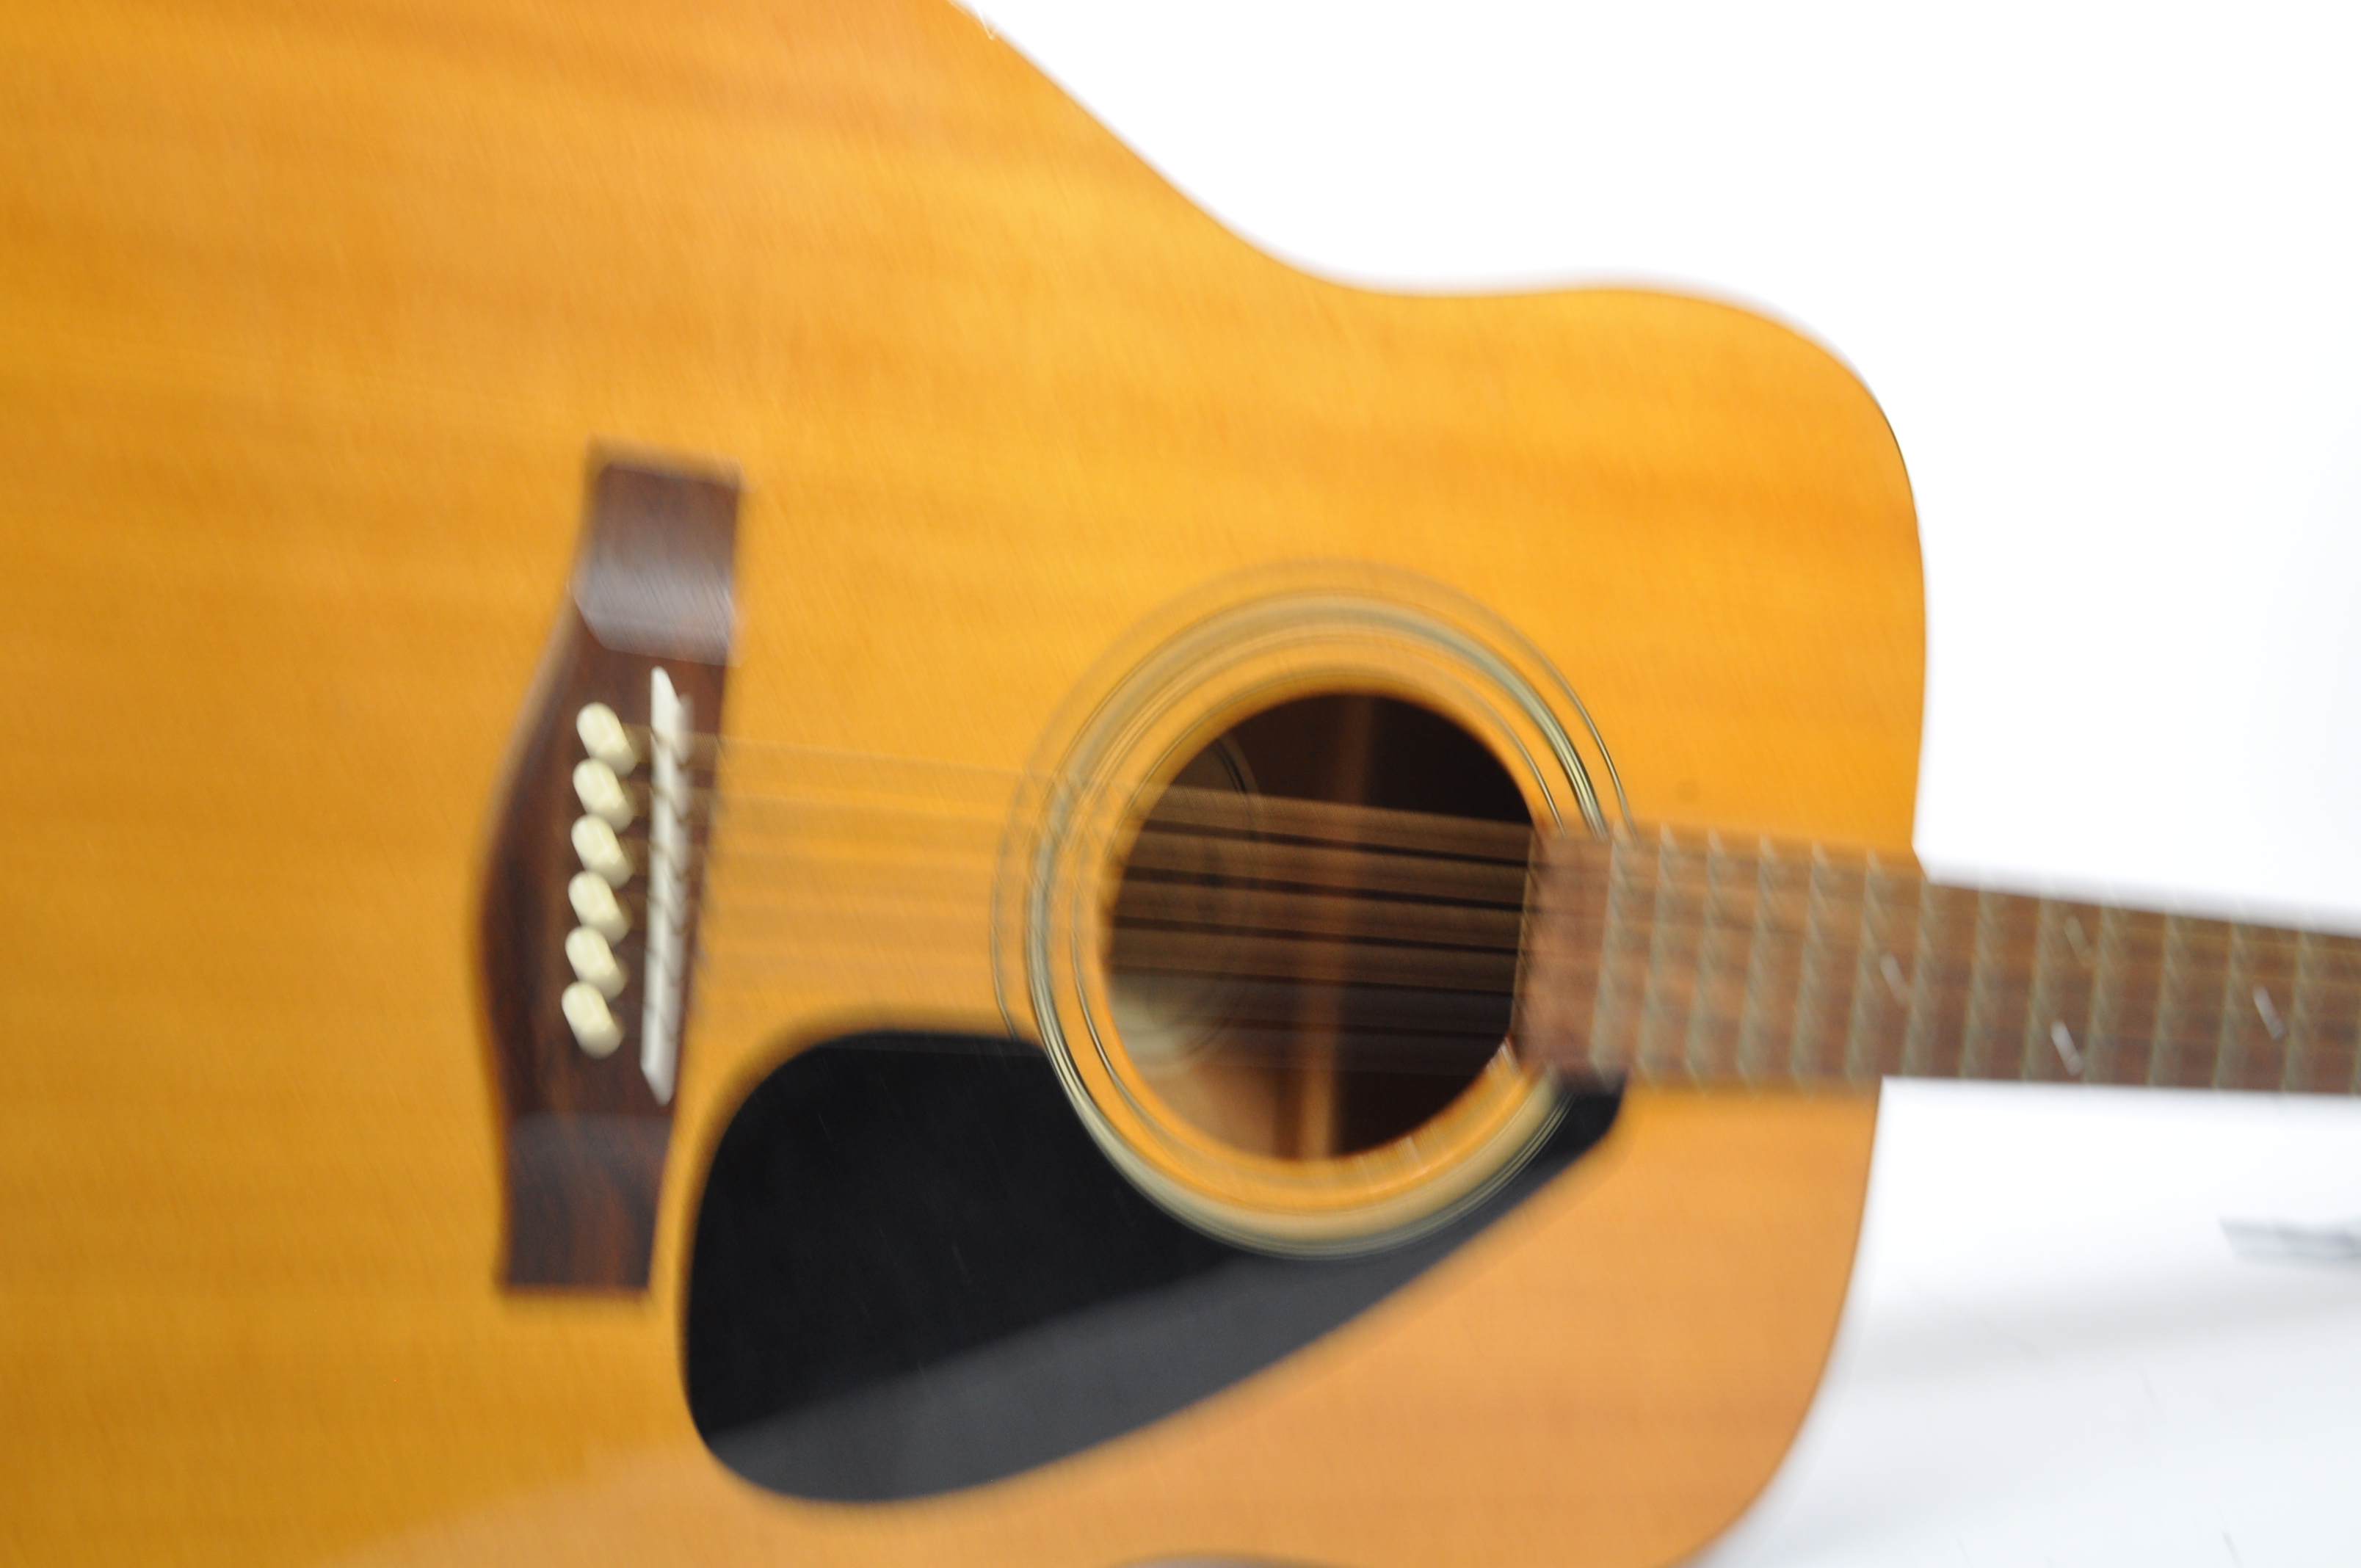 YAMAHA F310 F-310 ACOUSTIC GUITAR WITH CASE - Image 3 of 5